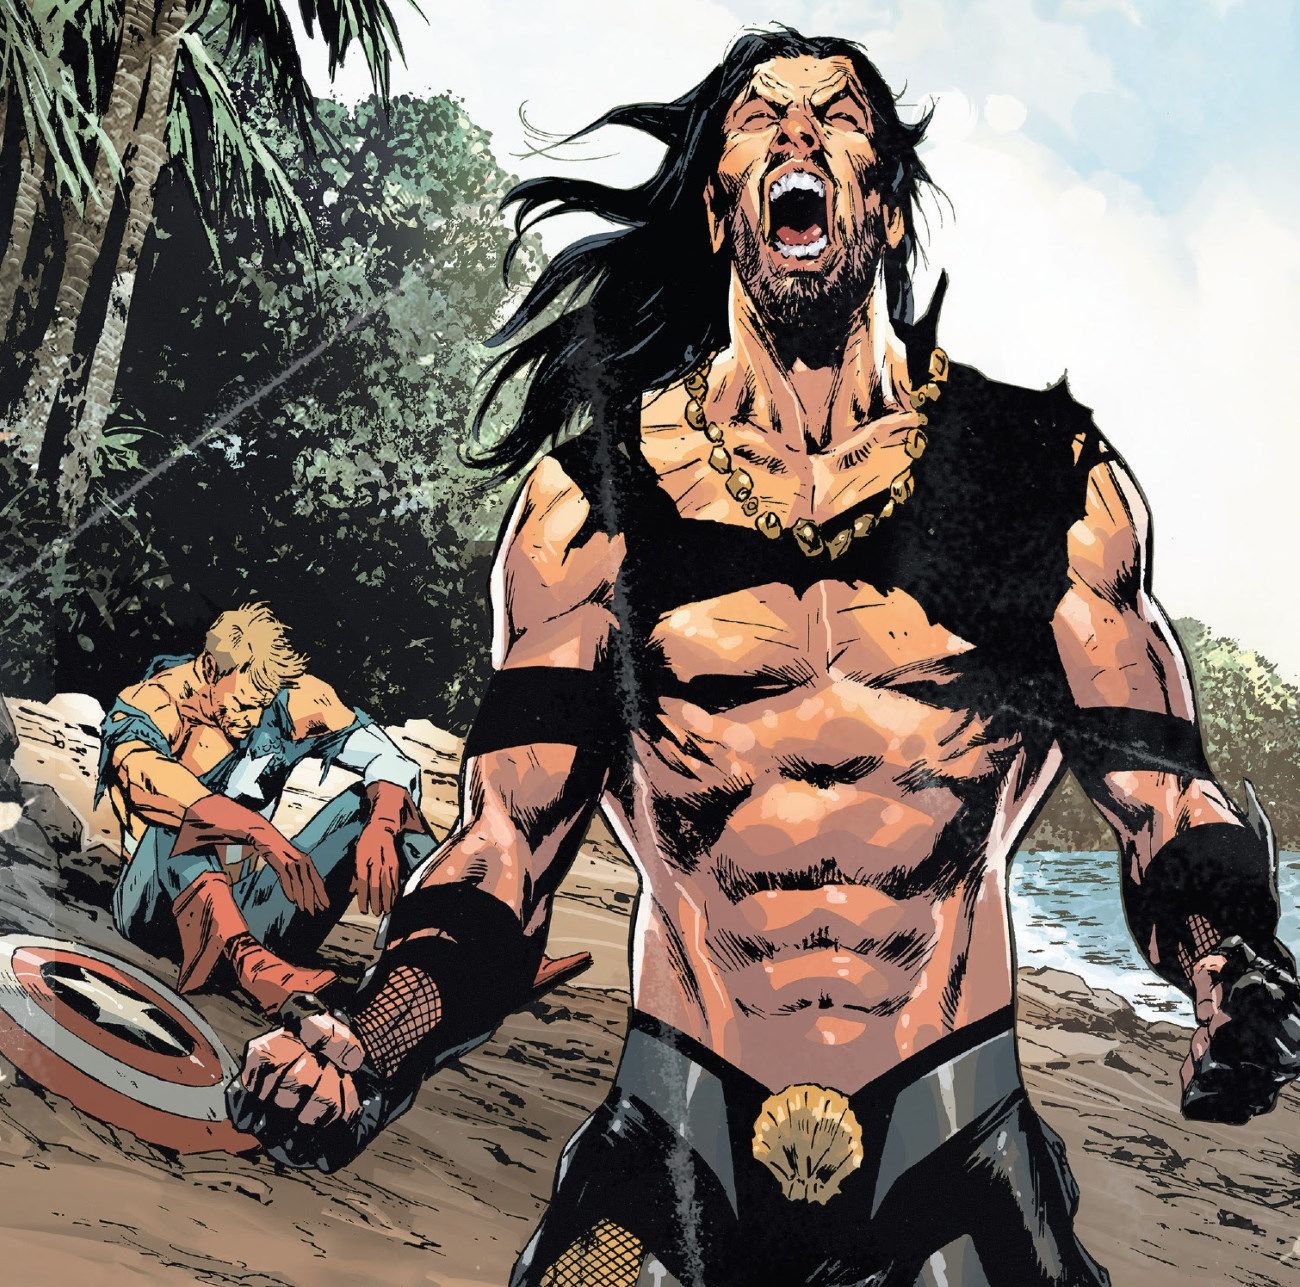 Marvel Just Turned Namor Into an Actual [SPOILER]